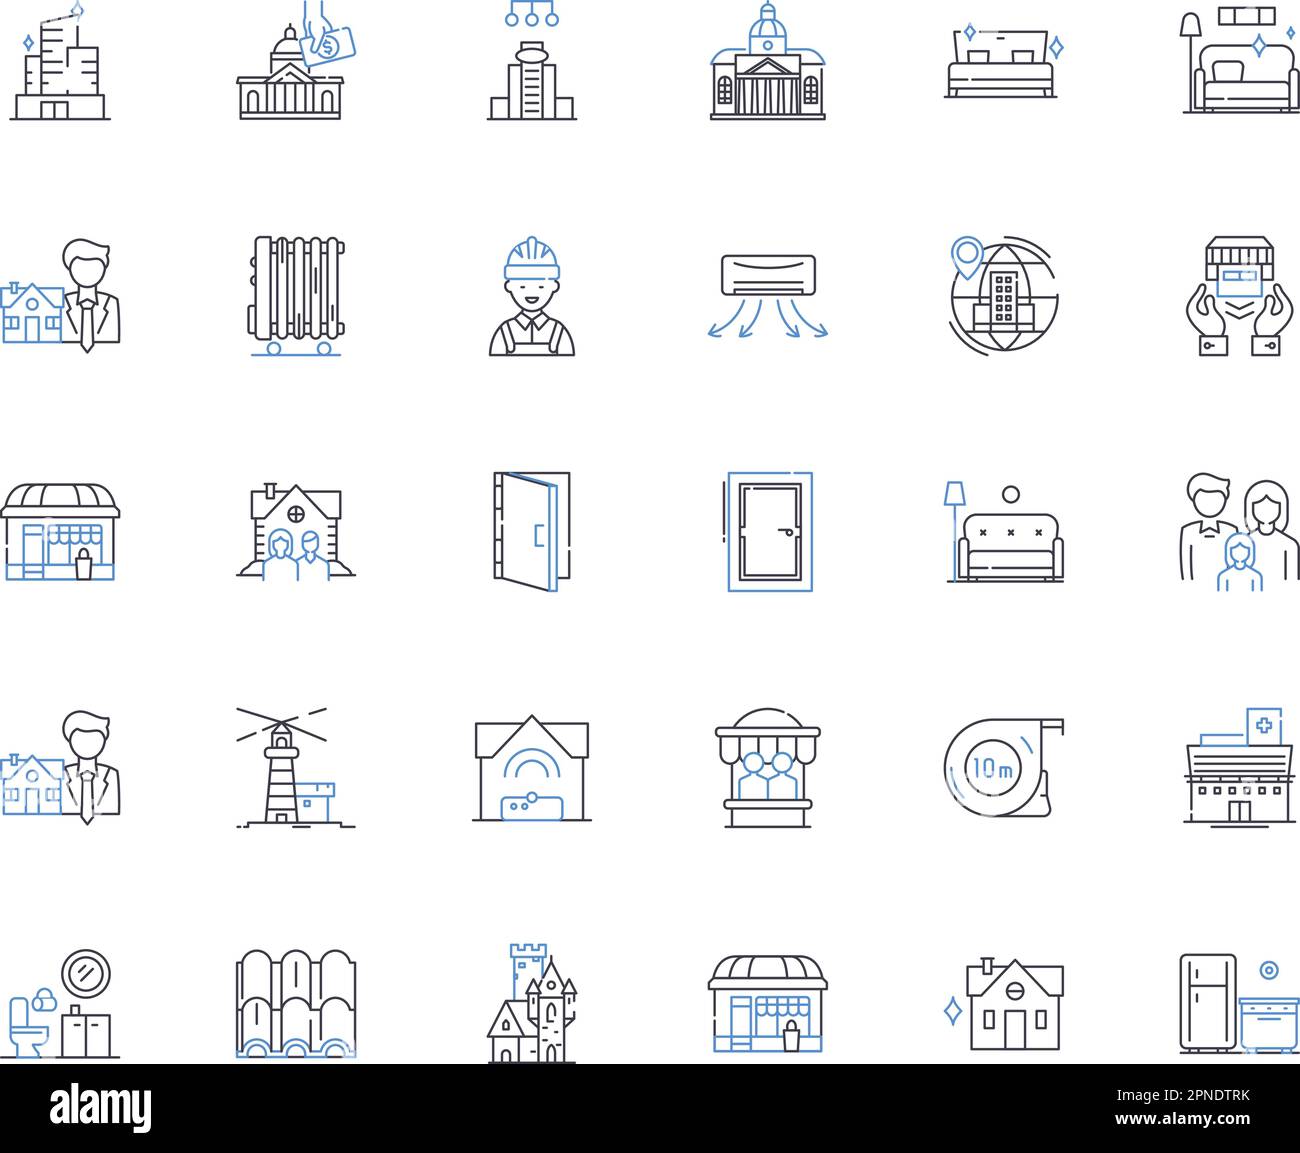 Facility Maintenance line icons collection. Repairs, Cleaning, Inspections, Upkeep, Maintenance, Sanitation, Preventative vector and linear Stock Vector